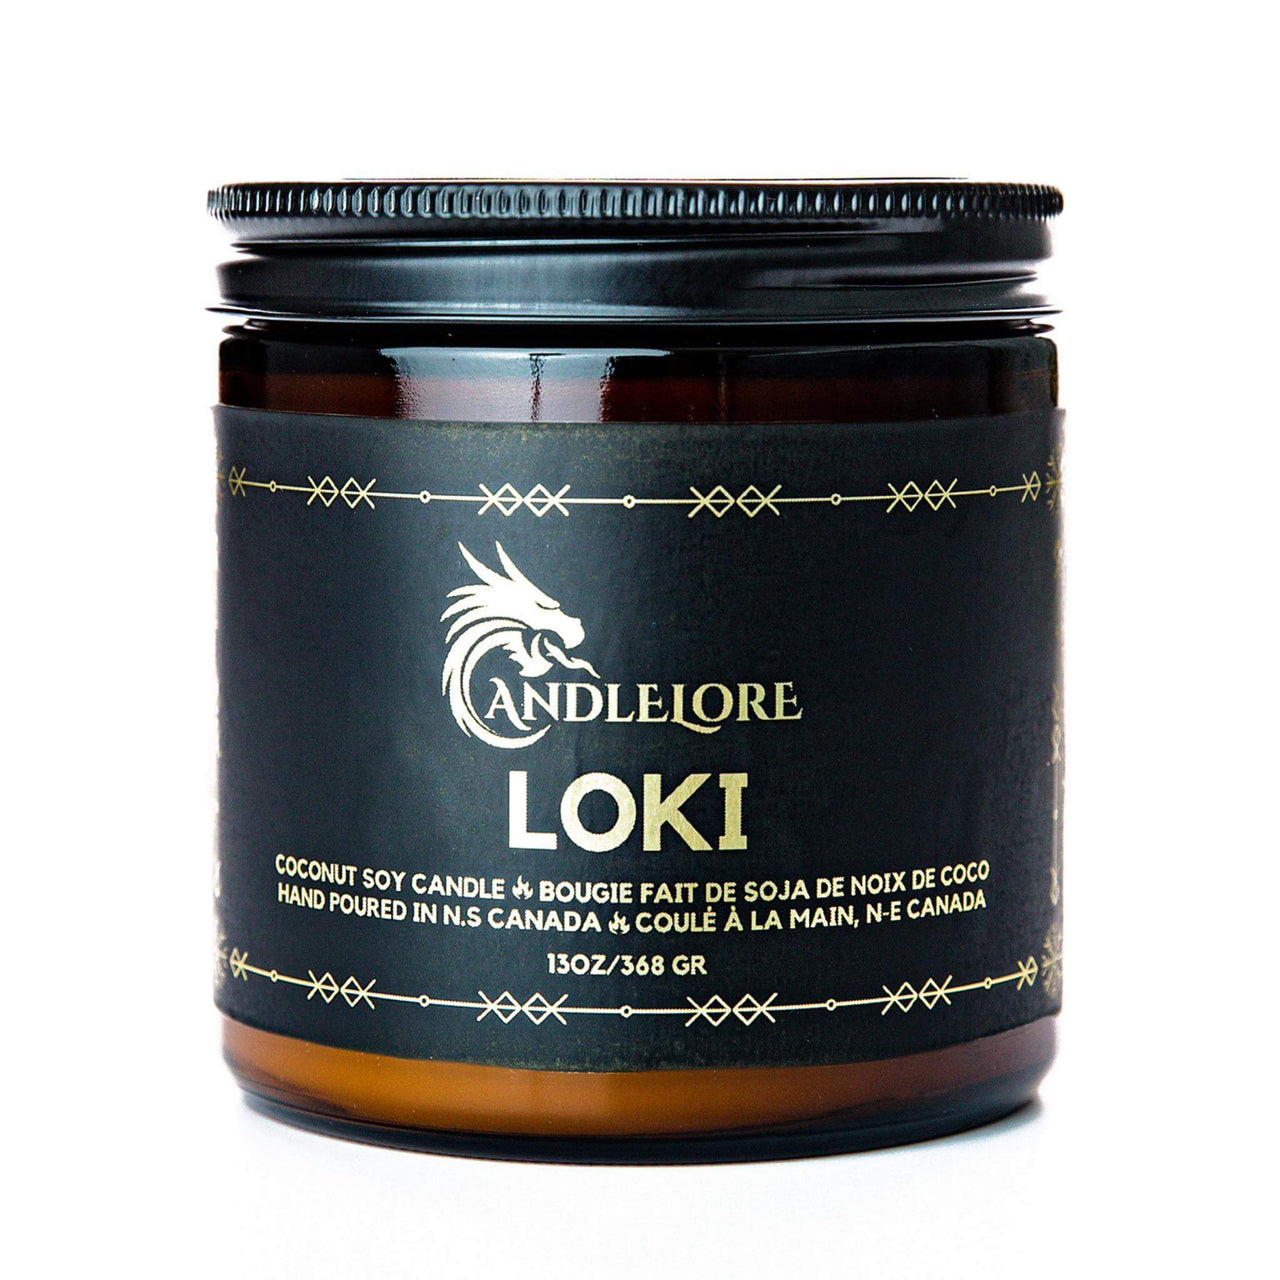 Large Loki scented candle on a white background